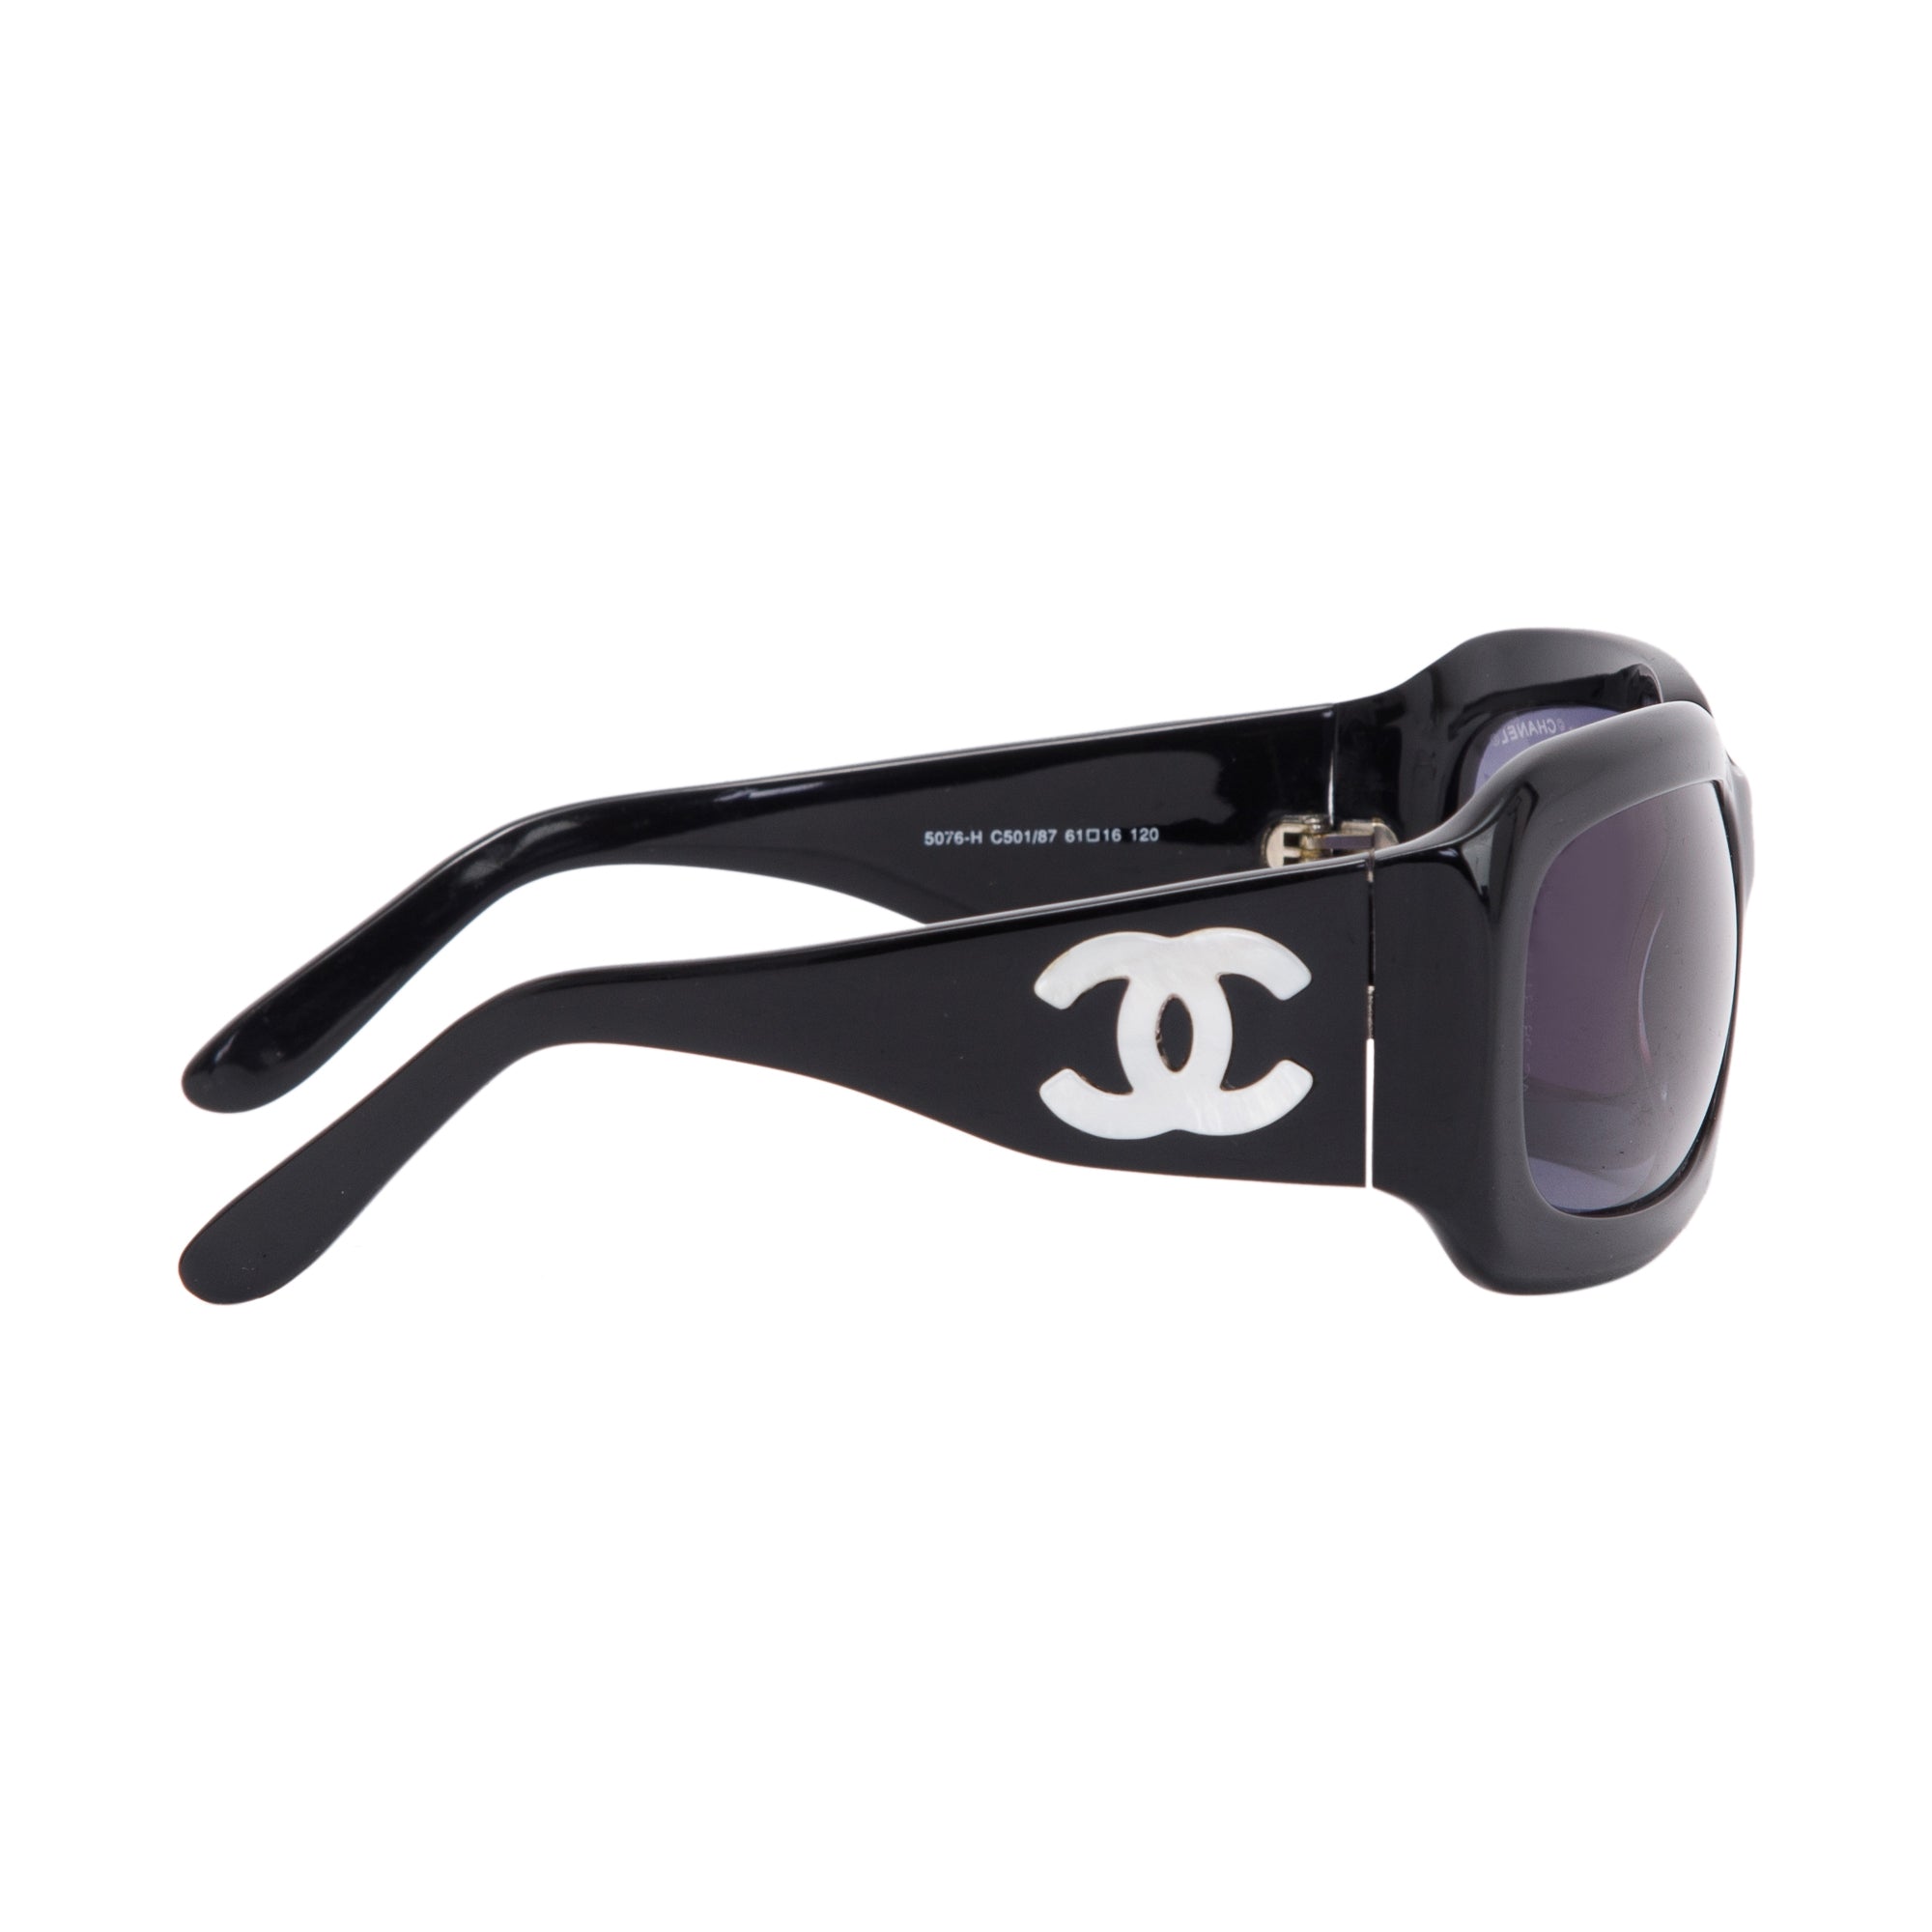 ✨SOLD✨Chanel 5076H sunnies  Nyc boutiques, Classic sunglasses